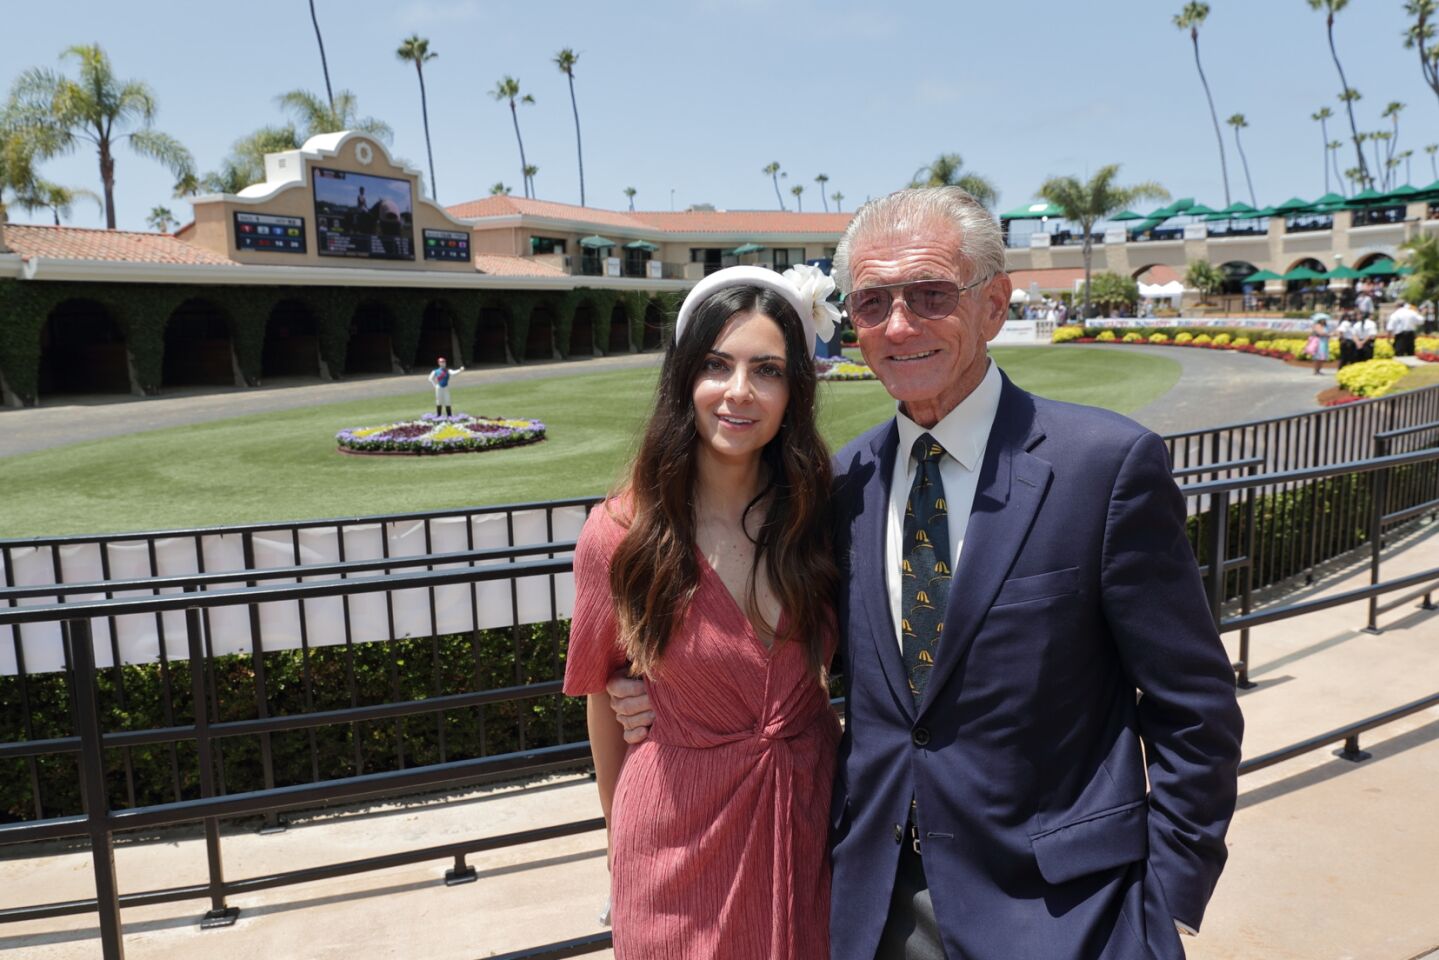 Kelsey Buller with Joe Harper (Director, President & CEO of the Del Mar Thoroughbred Club)